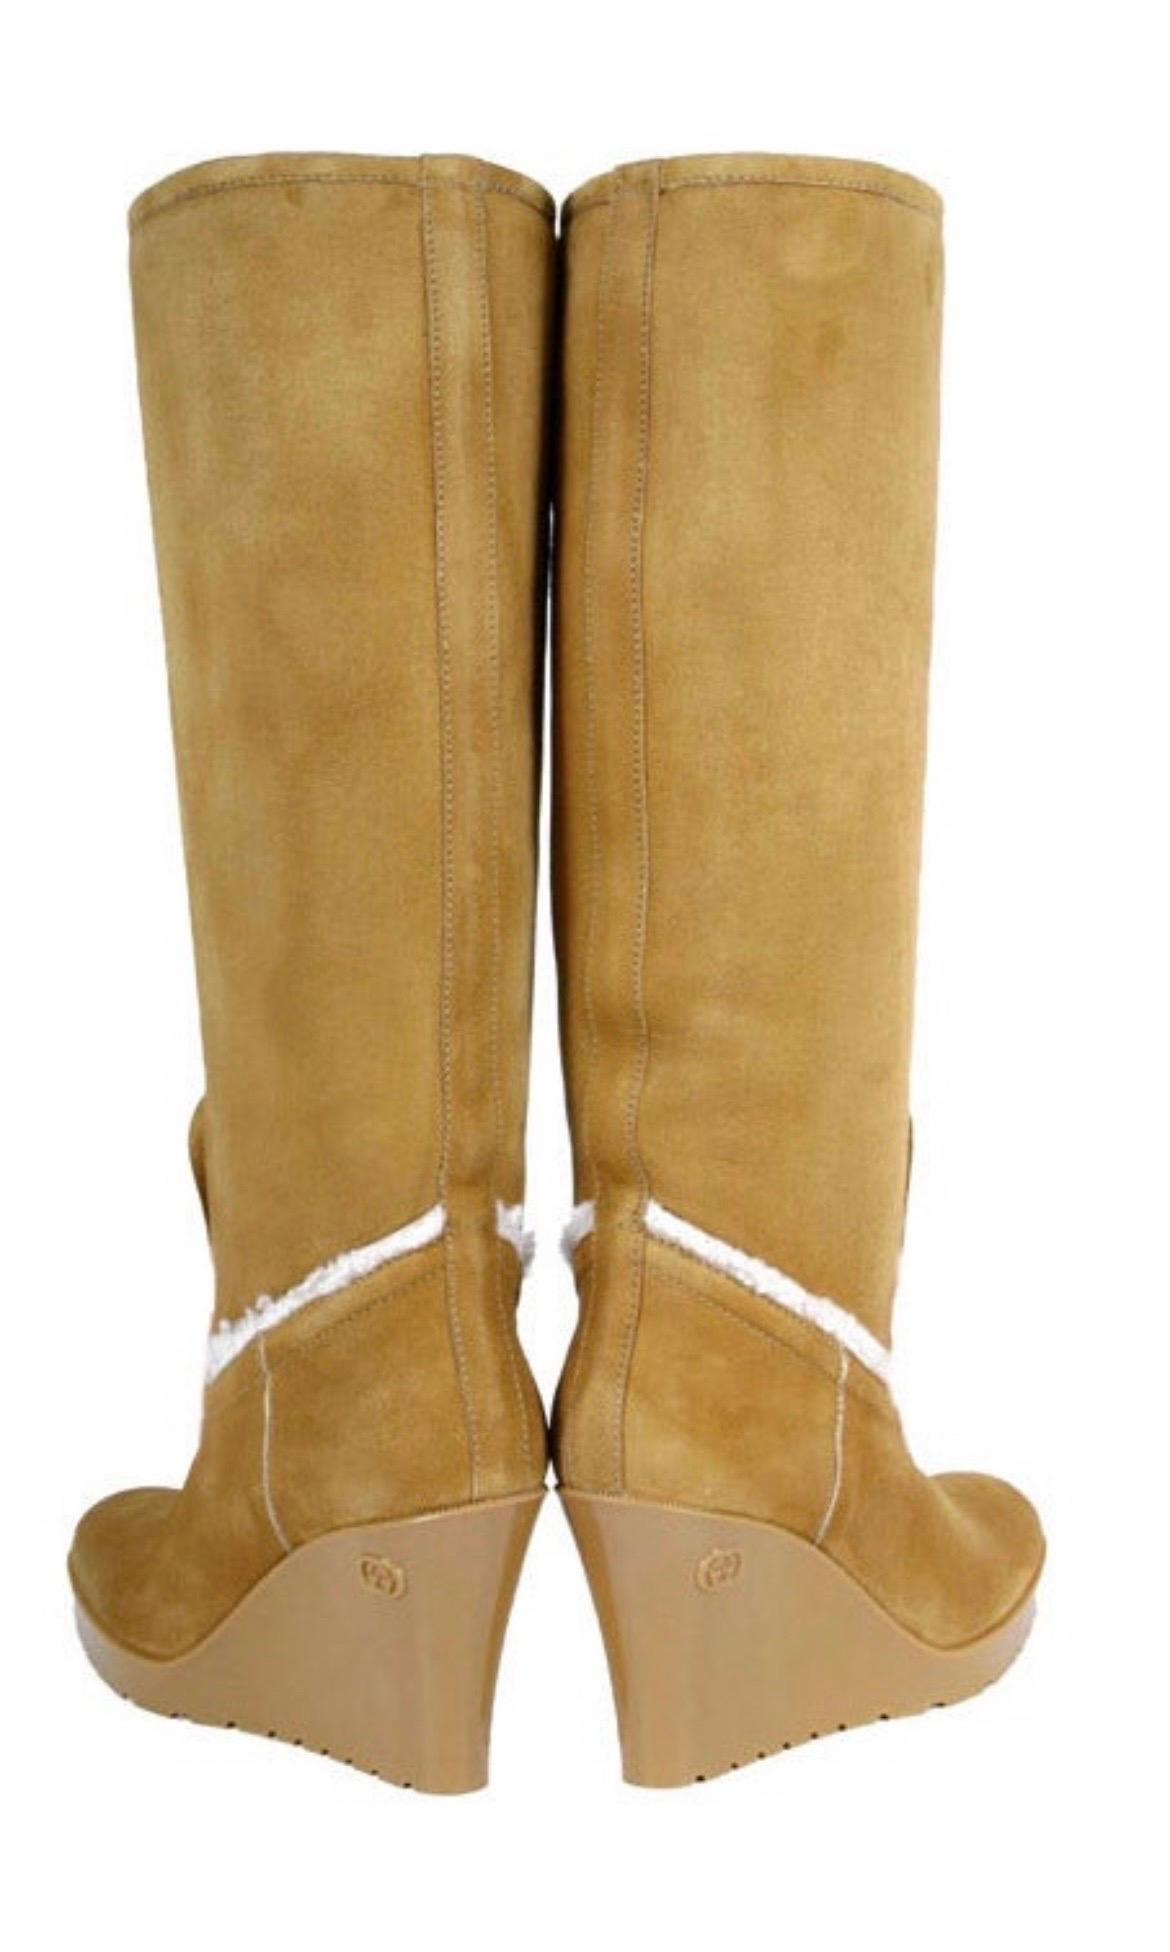 New Gucci Light Cognac Merino Lambskin Shearling Wedge Boots Size 6.5 In New Condition For Sale In Montgomery, TX